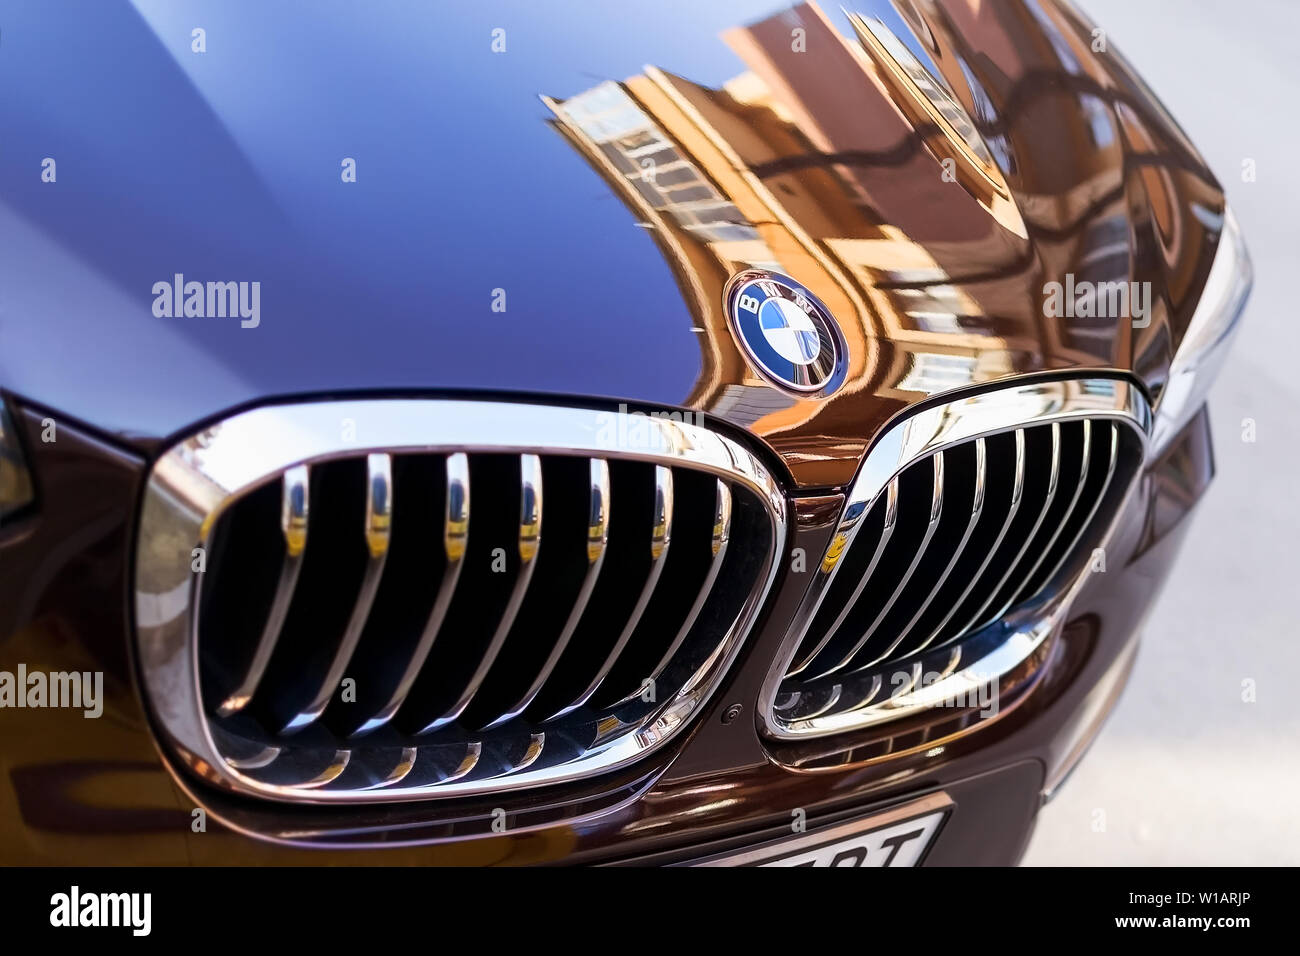 Chrome BMW logo sign close-up. Car grill and front hood of black blue BMW on an outdoor parking on a sunny day. City reflections on car hood. Stock Photo